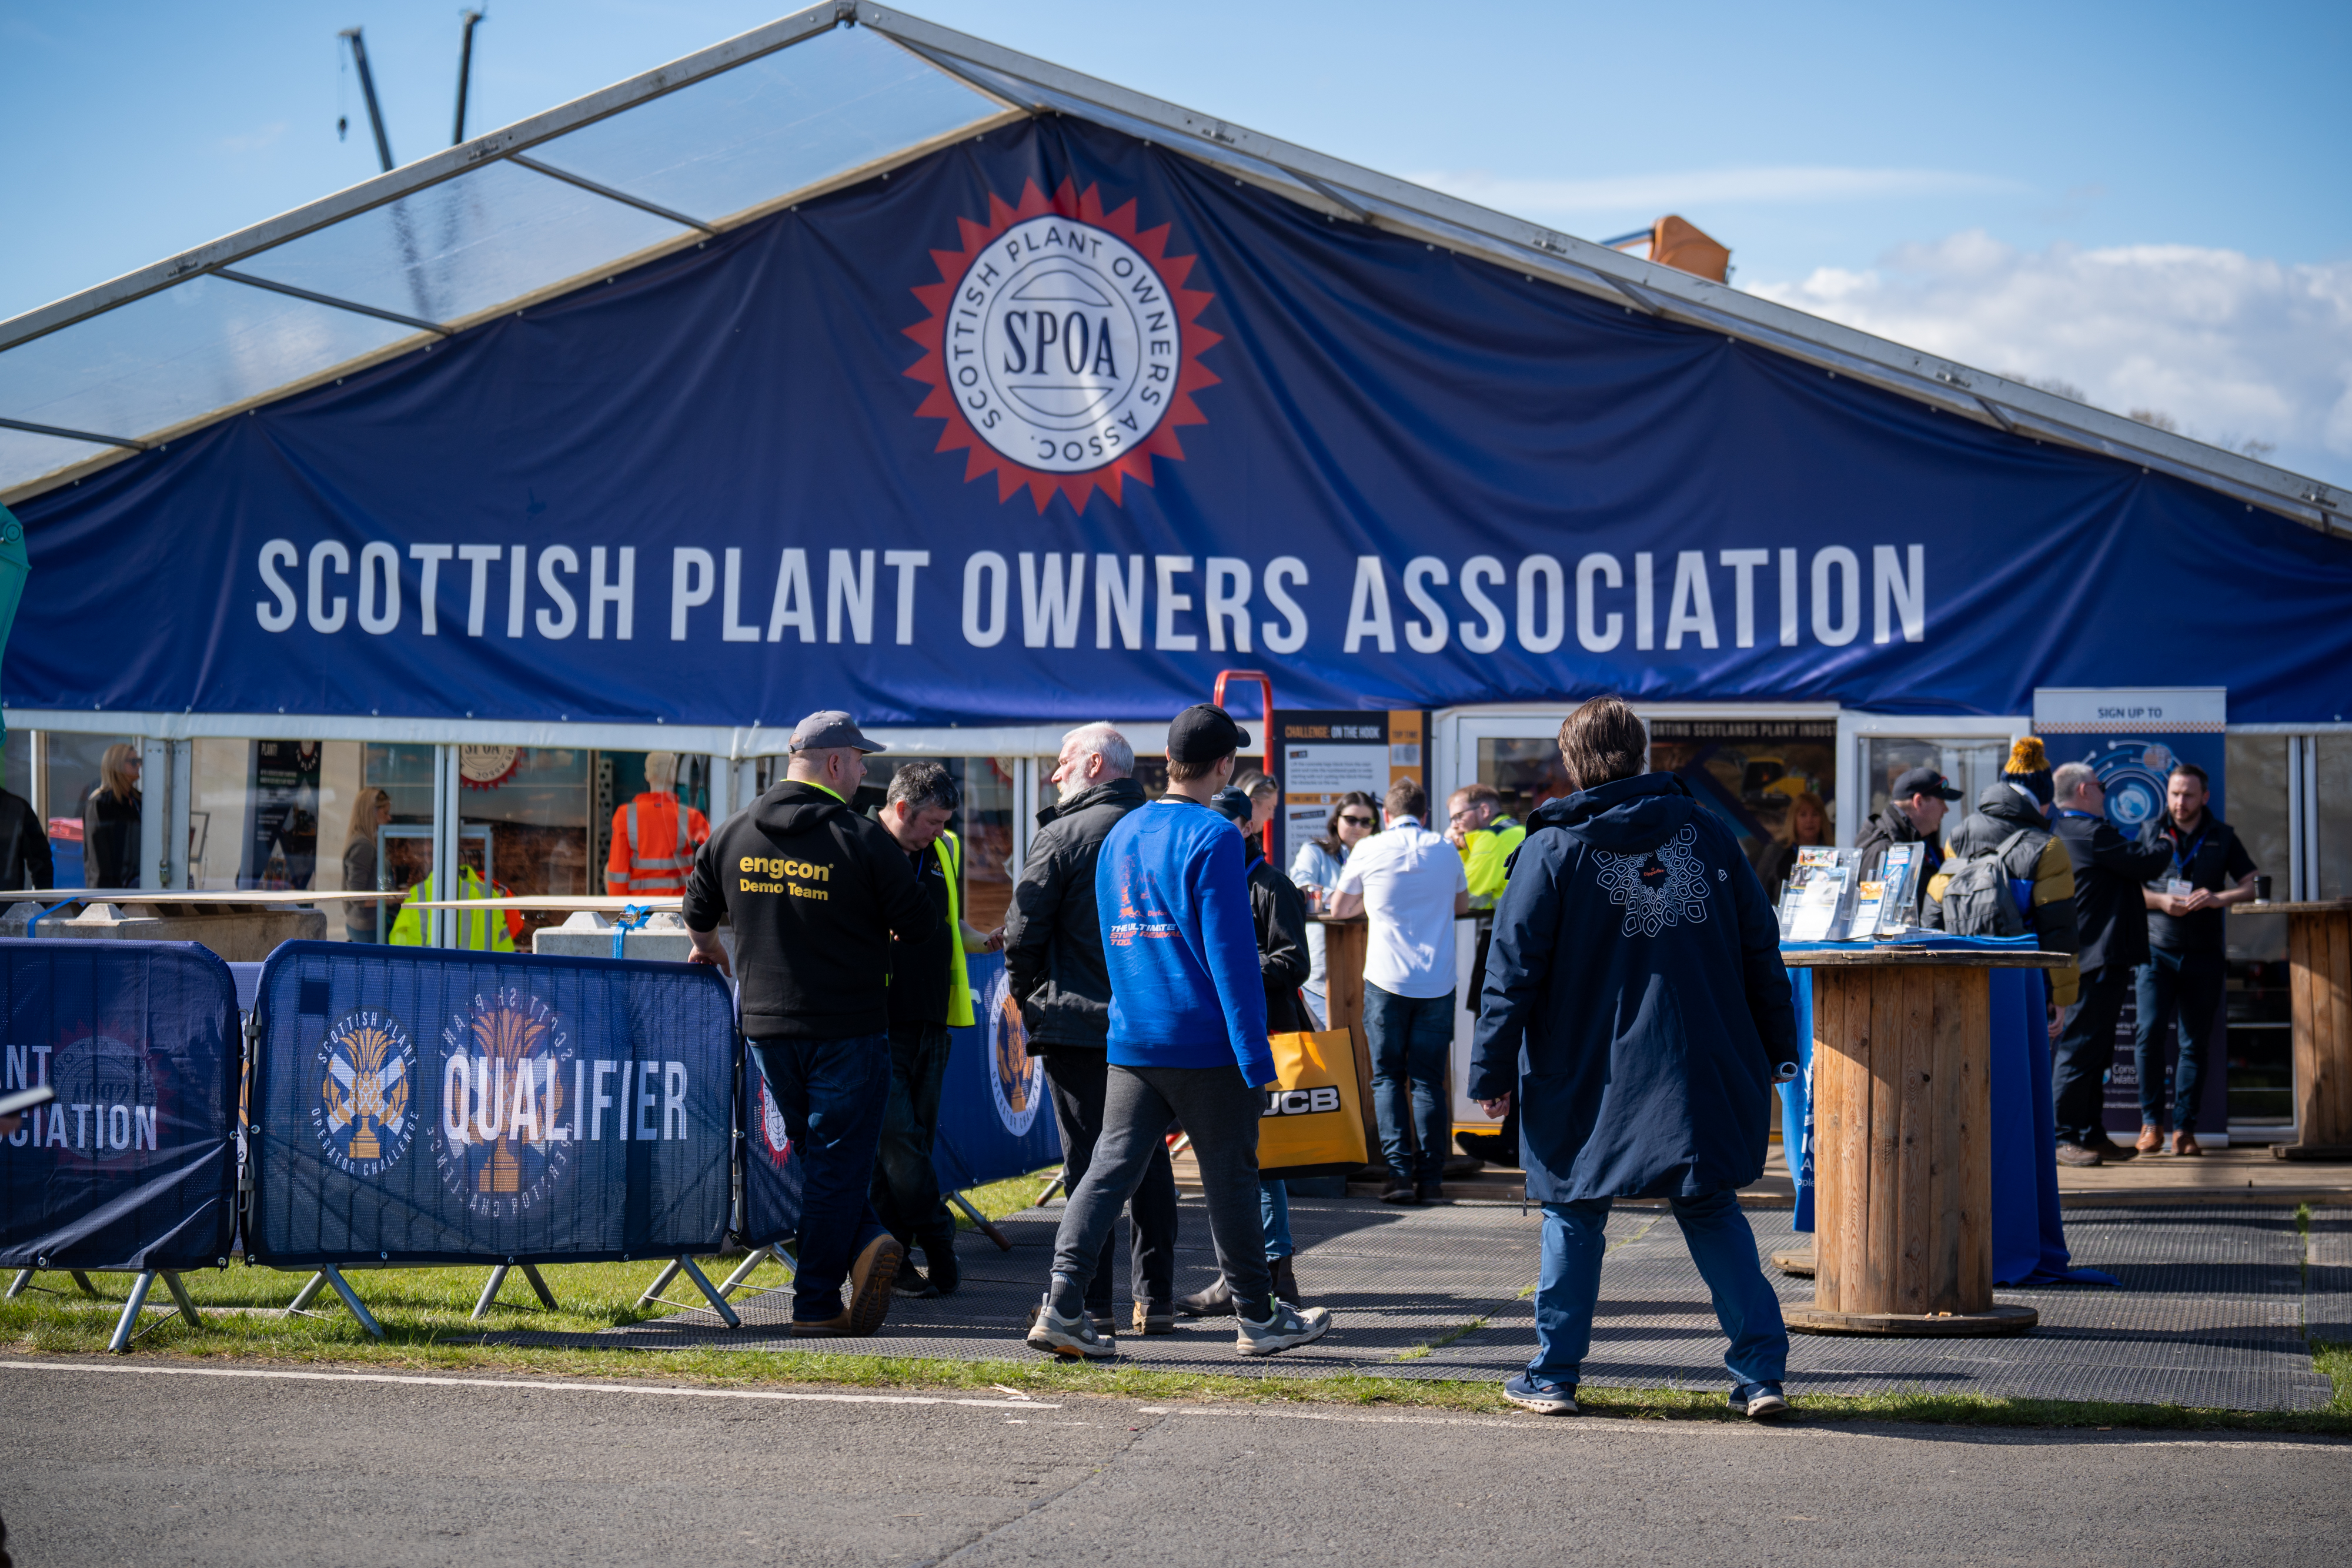 Busy SPOA stand at ScotPlant.jpg